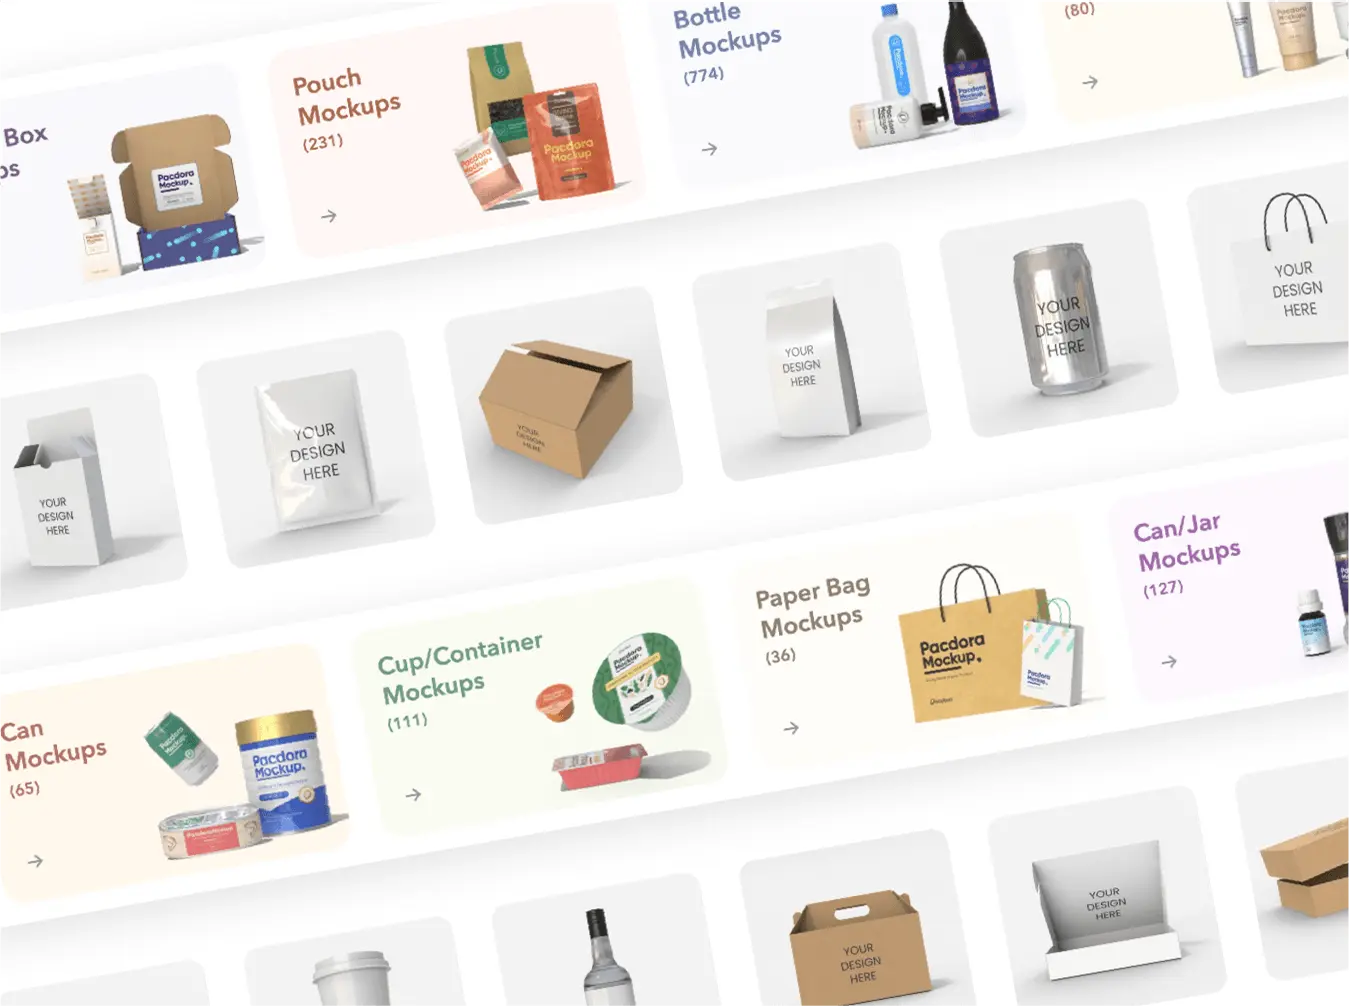 Pacdora: The Perfect Design Tool for Packaging